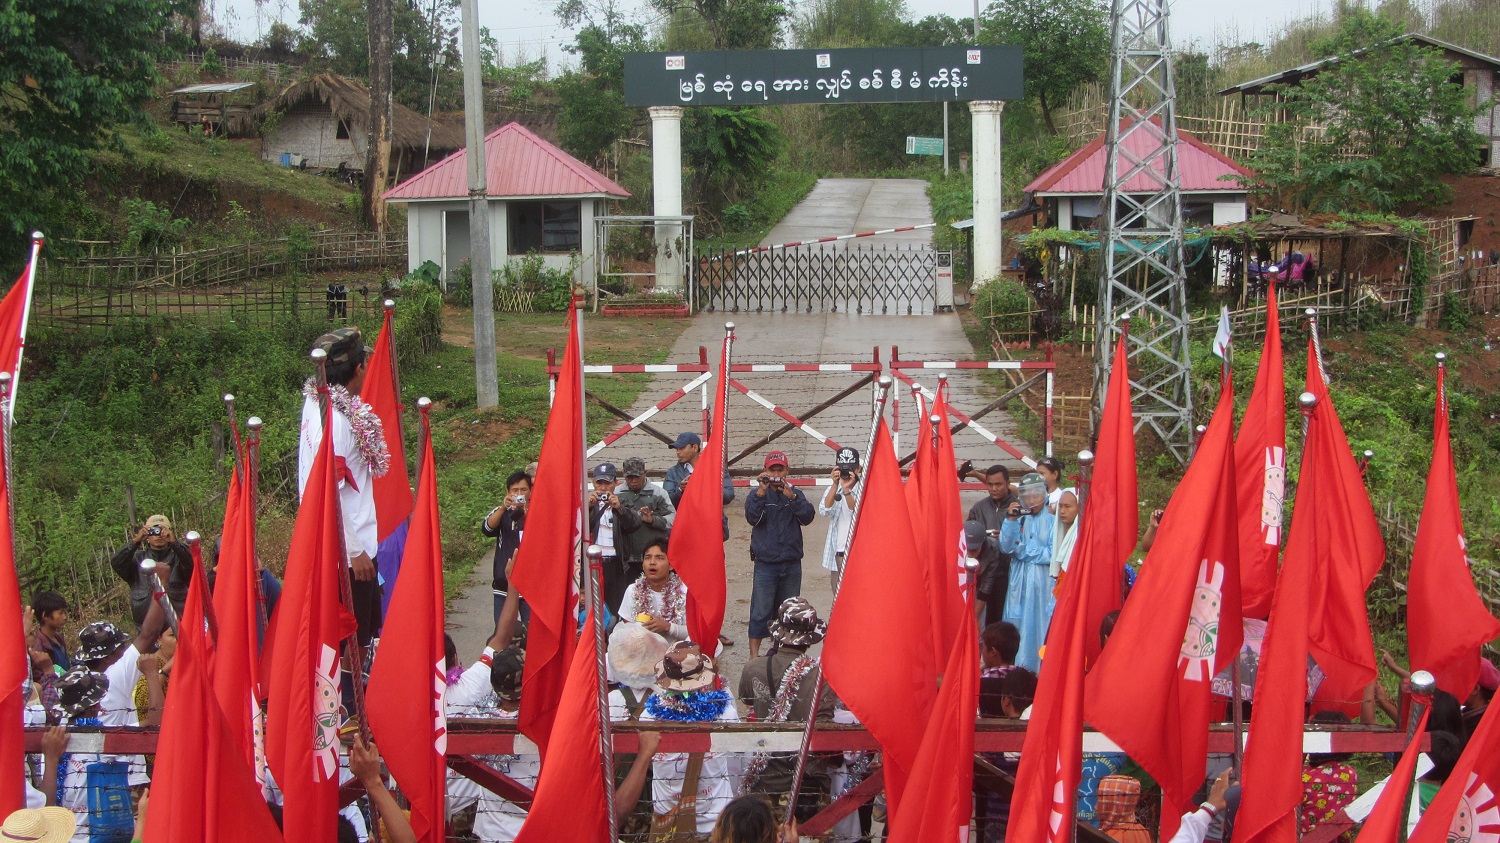  Locals staging a demonstration against the dam in 2015.(Photos: Nan Lwin Hnin Pwint / The Irrawaddy)